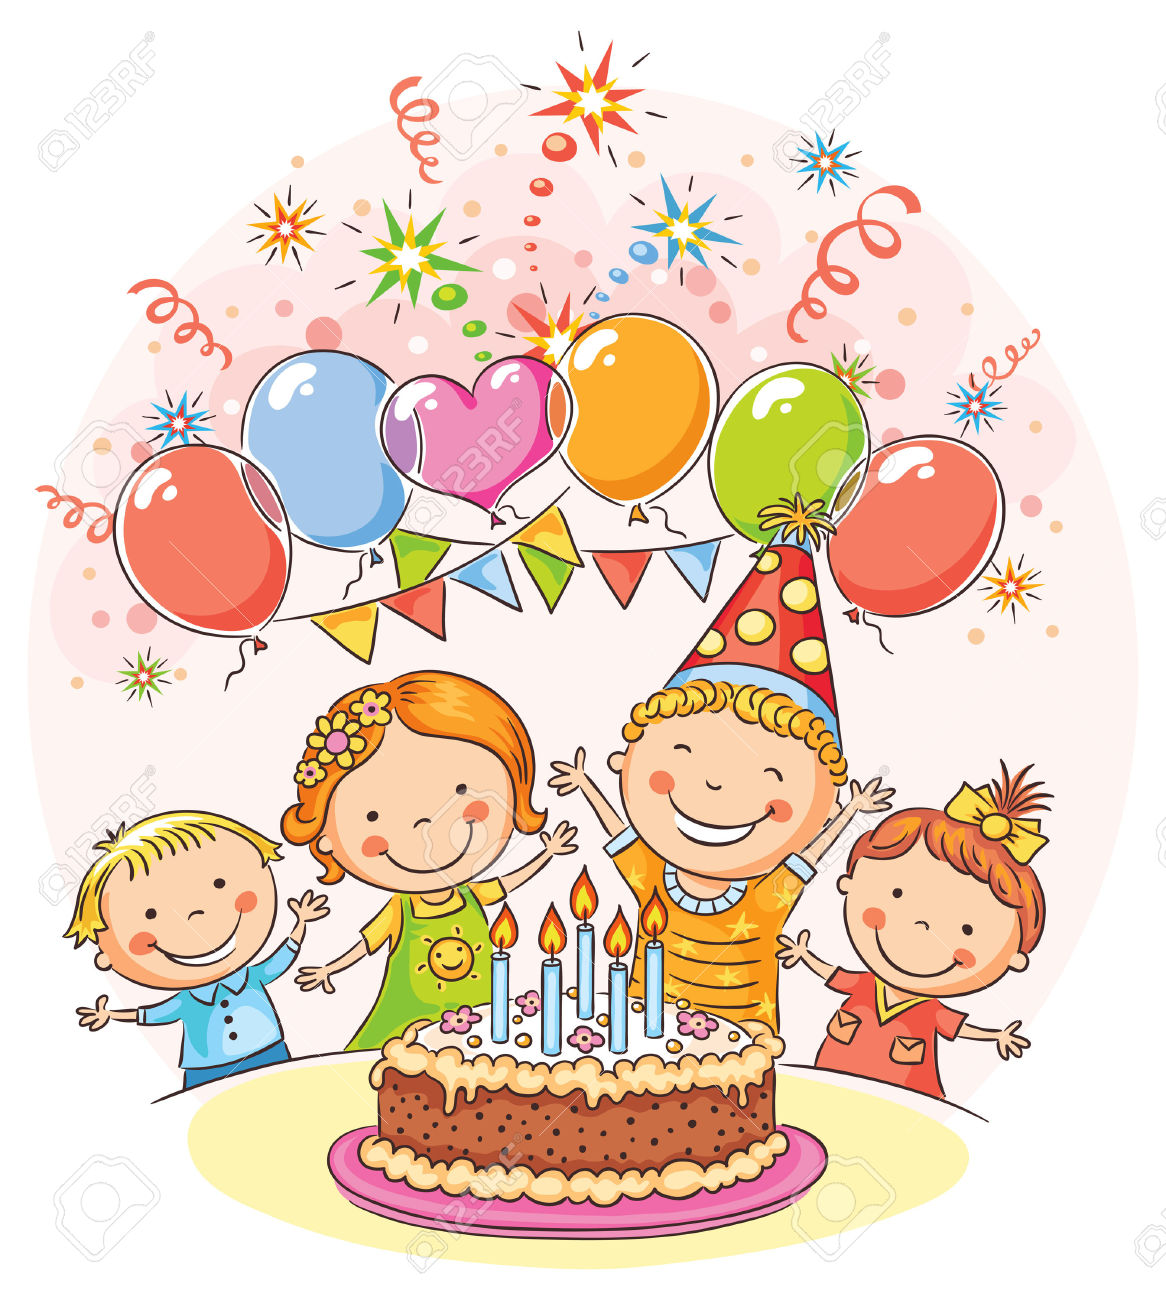 Lets Party The Best Birthday Party Clip Art To Add Some Festive Flair